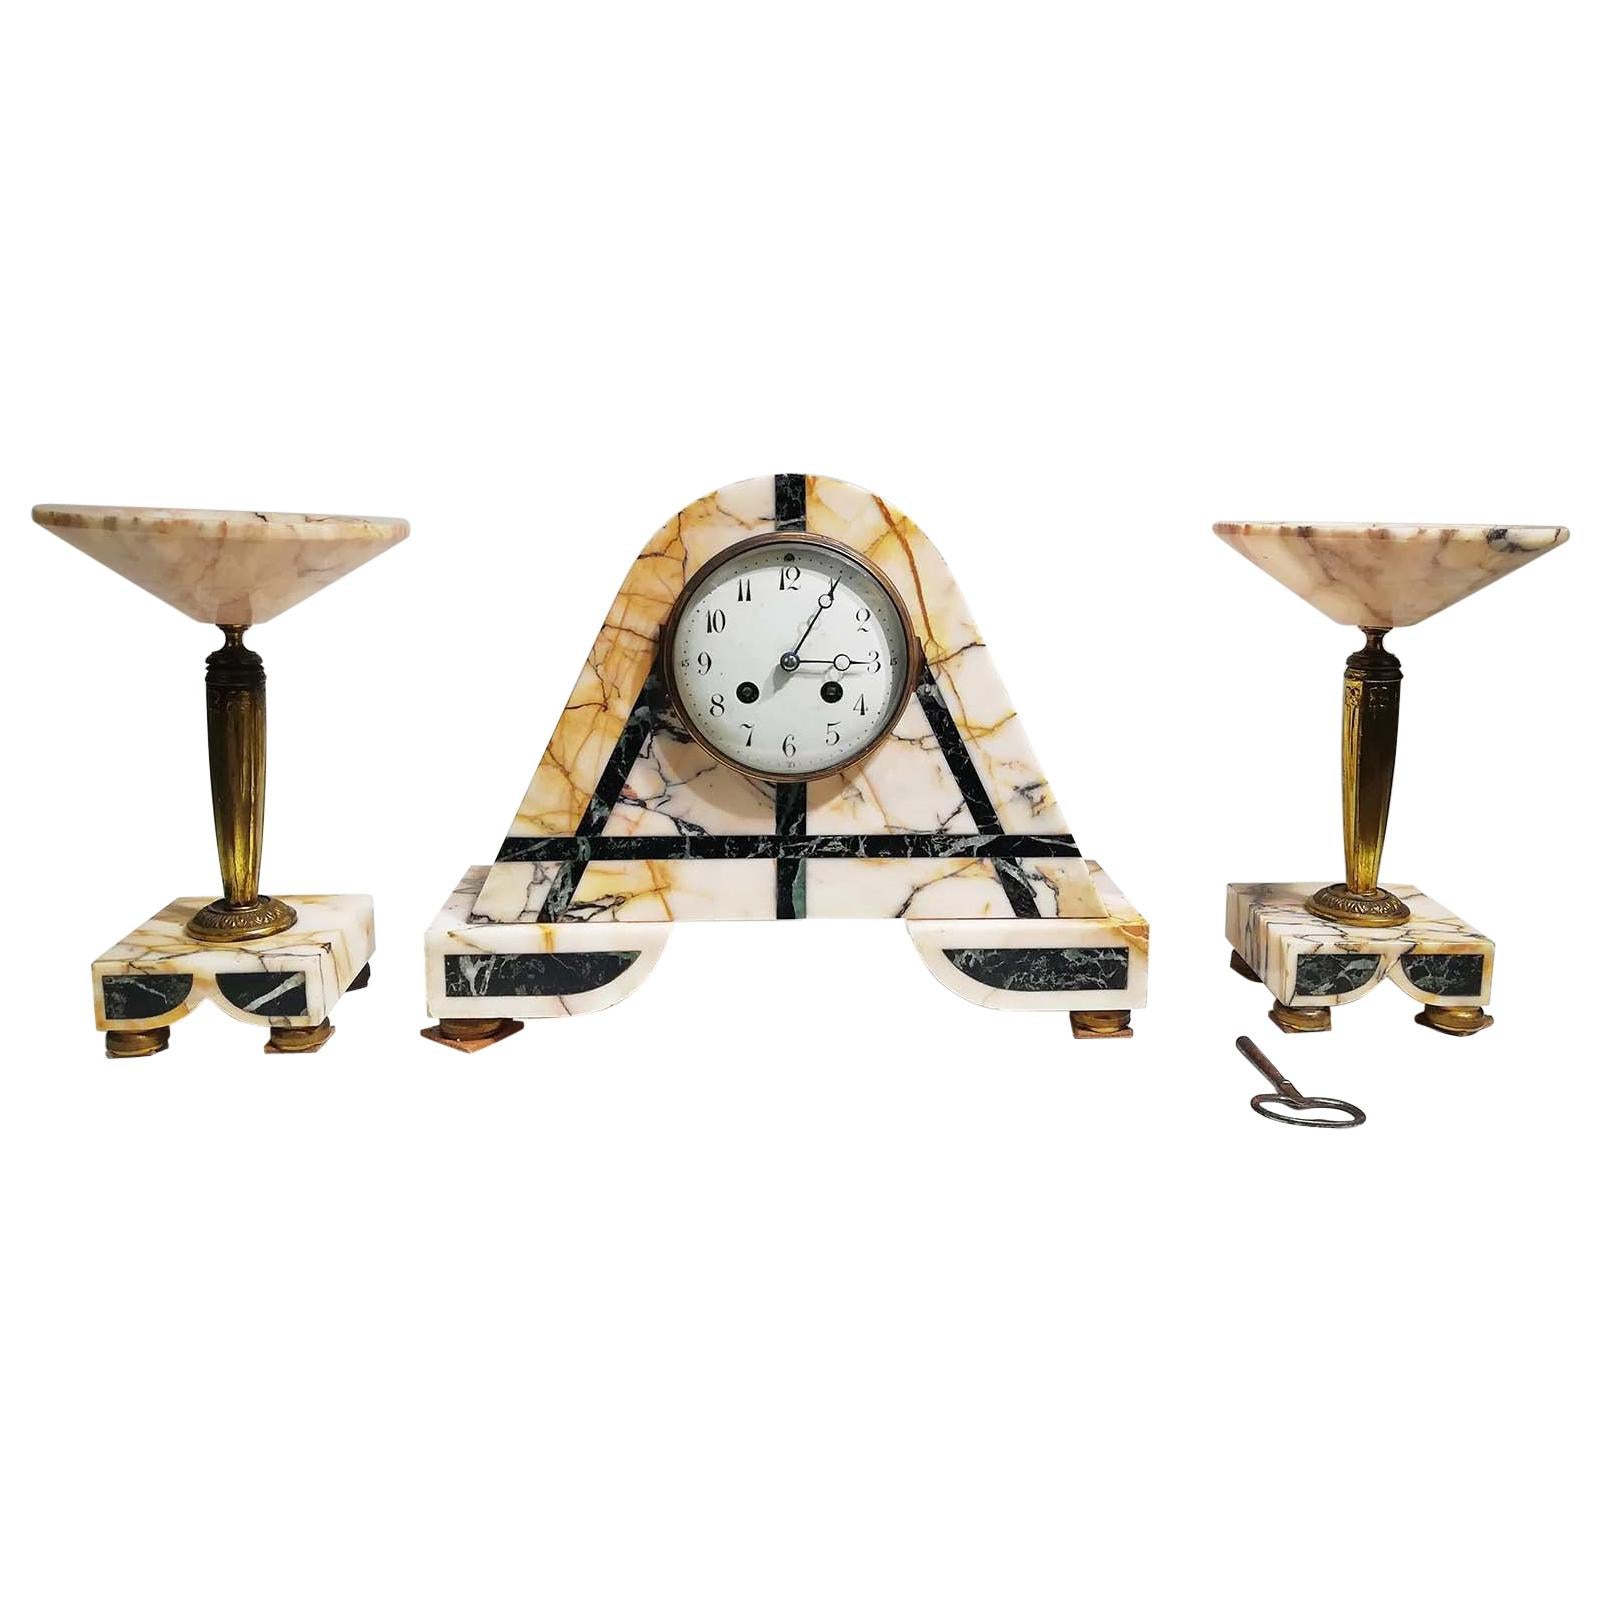 Gorgeous French Art Deco Clock Set and Two Tazzas Signed C.H PARIS and “JUST"